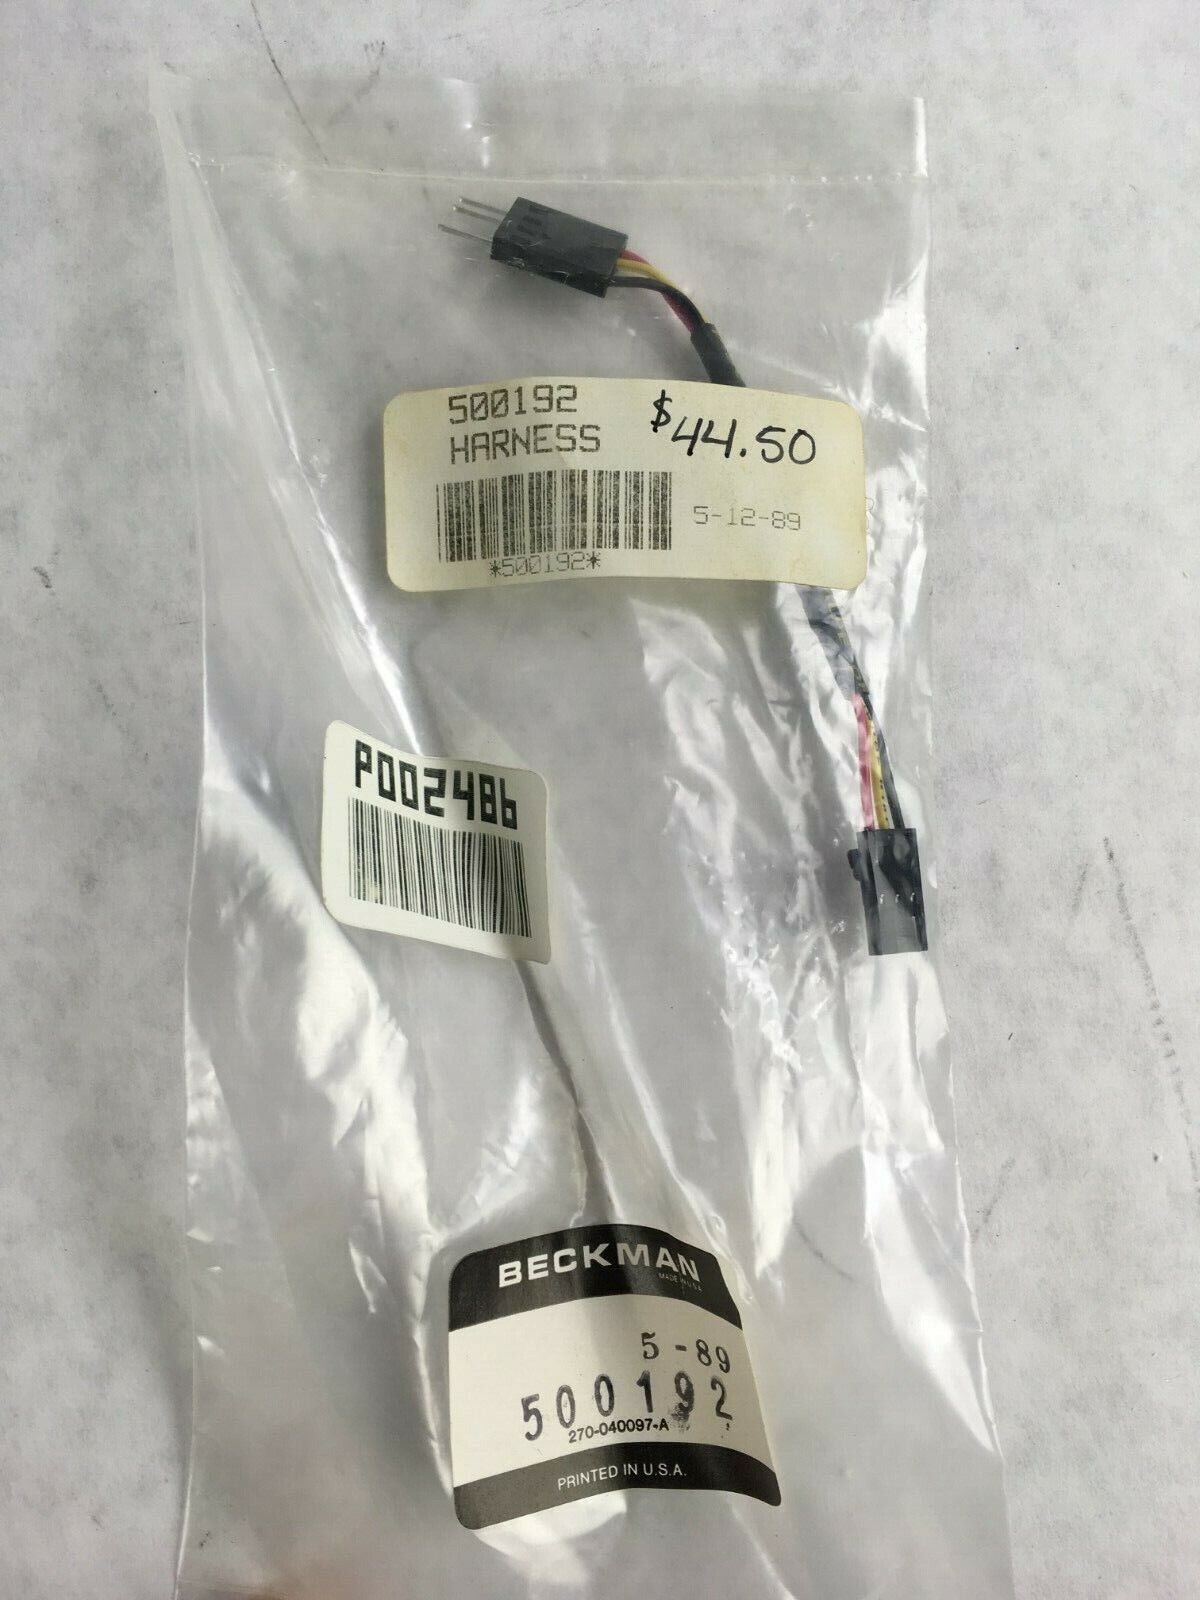 HARNESS SOURCE DRIVE Cord Cable 500192 by Beckman Coulter